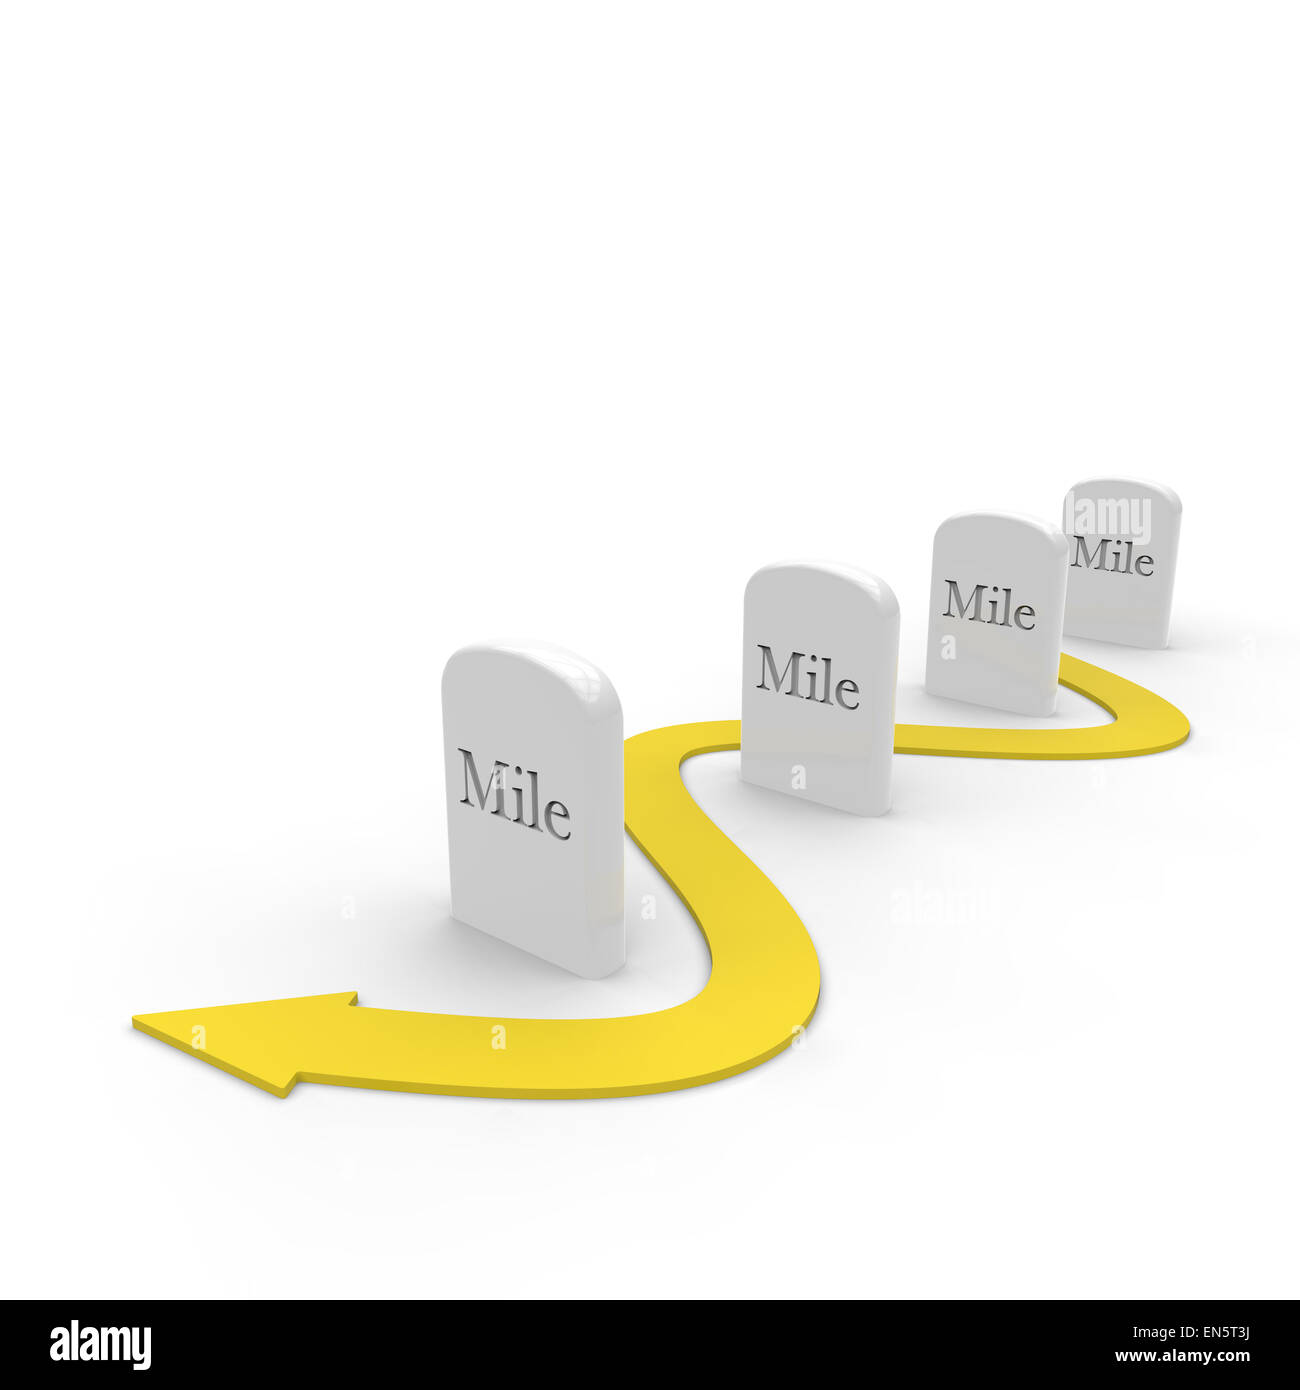 milestones with a yellow arrow weaving between them on a white background Stock Photo